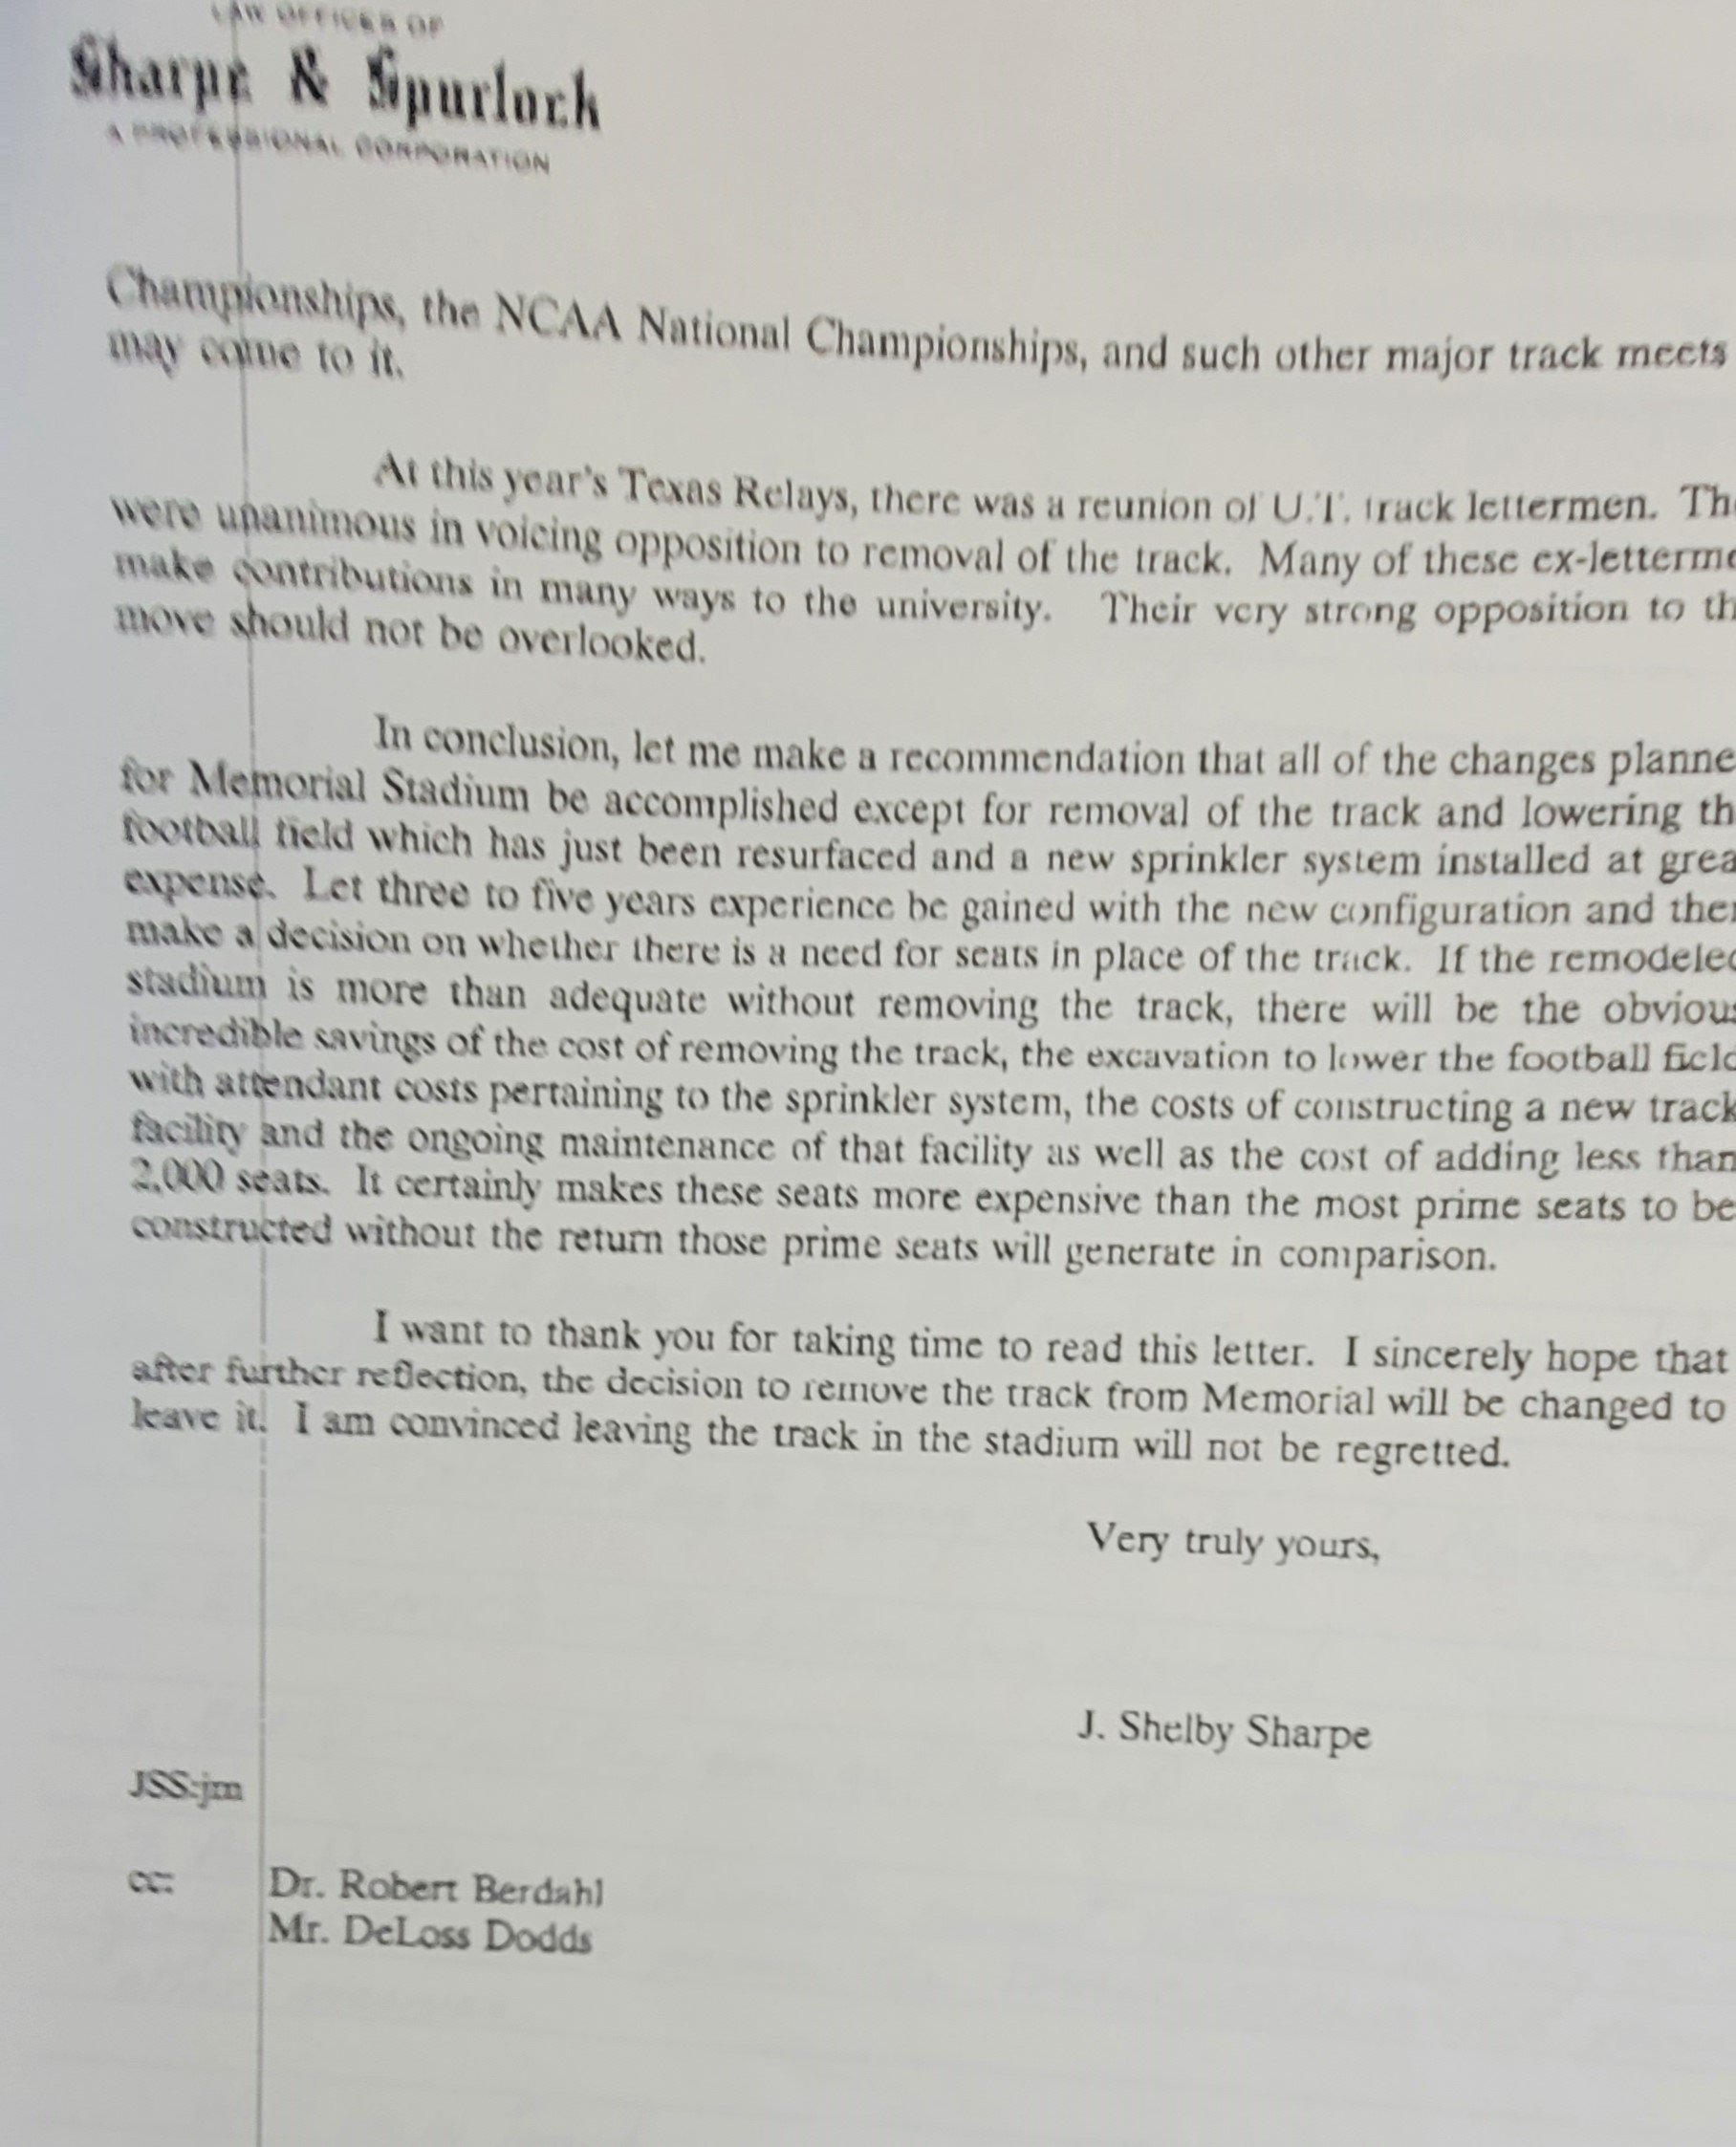 1996  a letter written to Hicks  questioning the decision to build a new track facility in place of the track in DKR stadium Conrad  (9).jpg